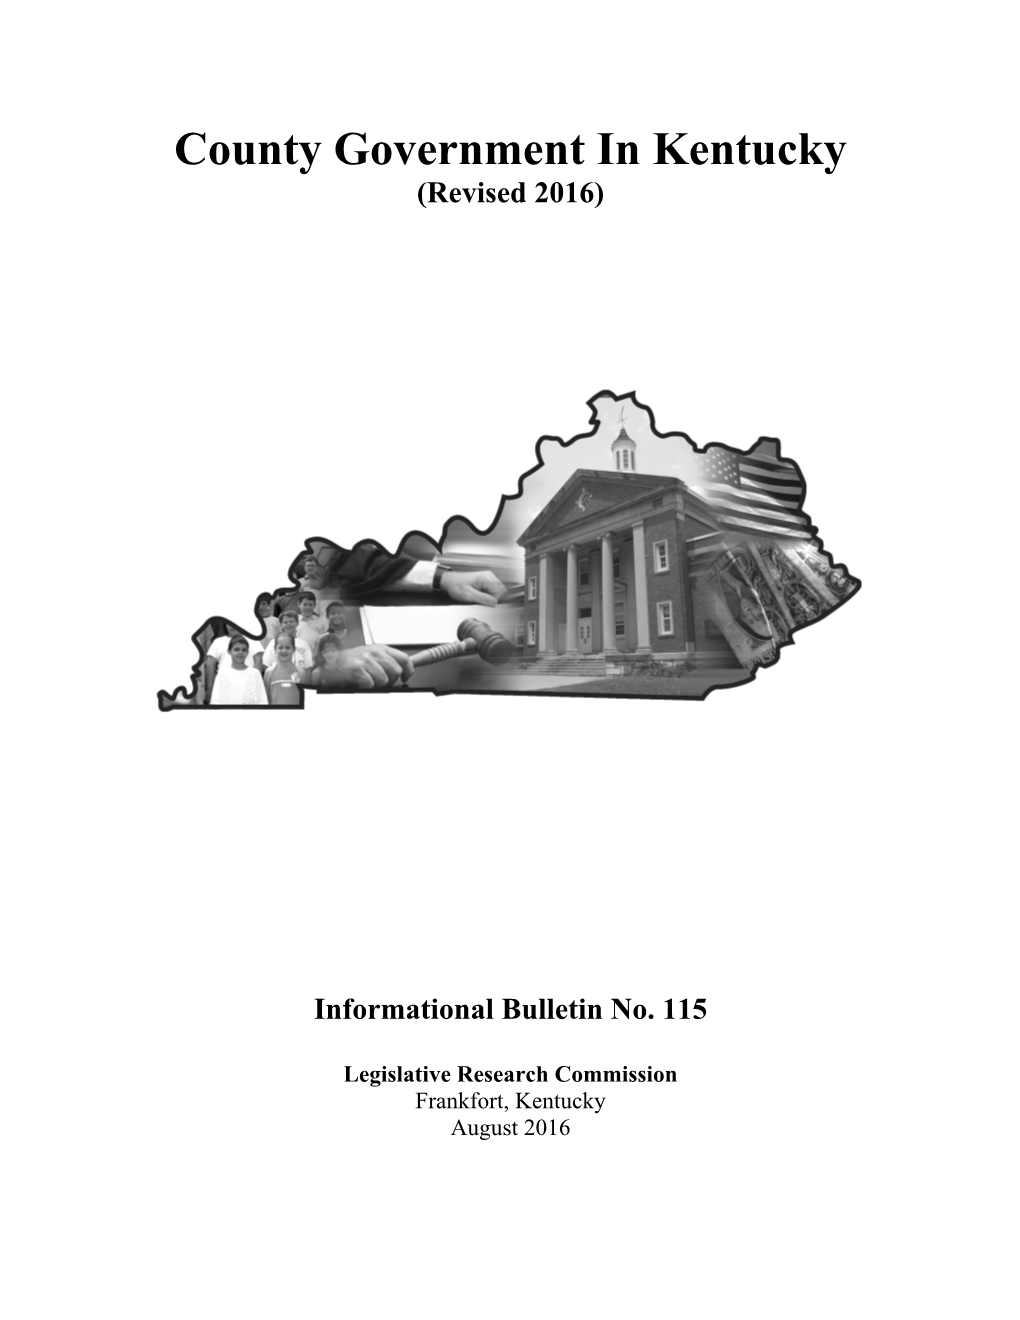 County Government in Kentucky (Revised 2016)